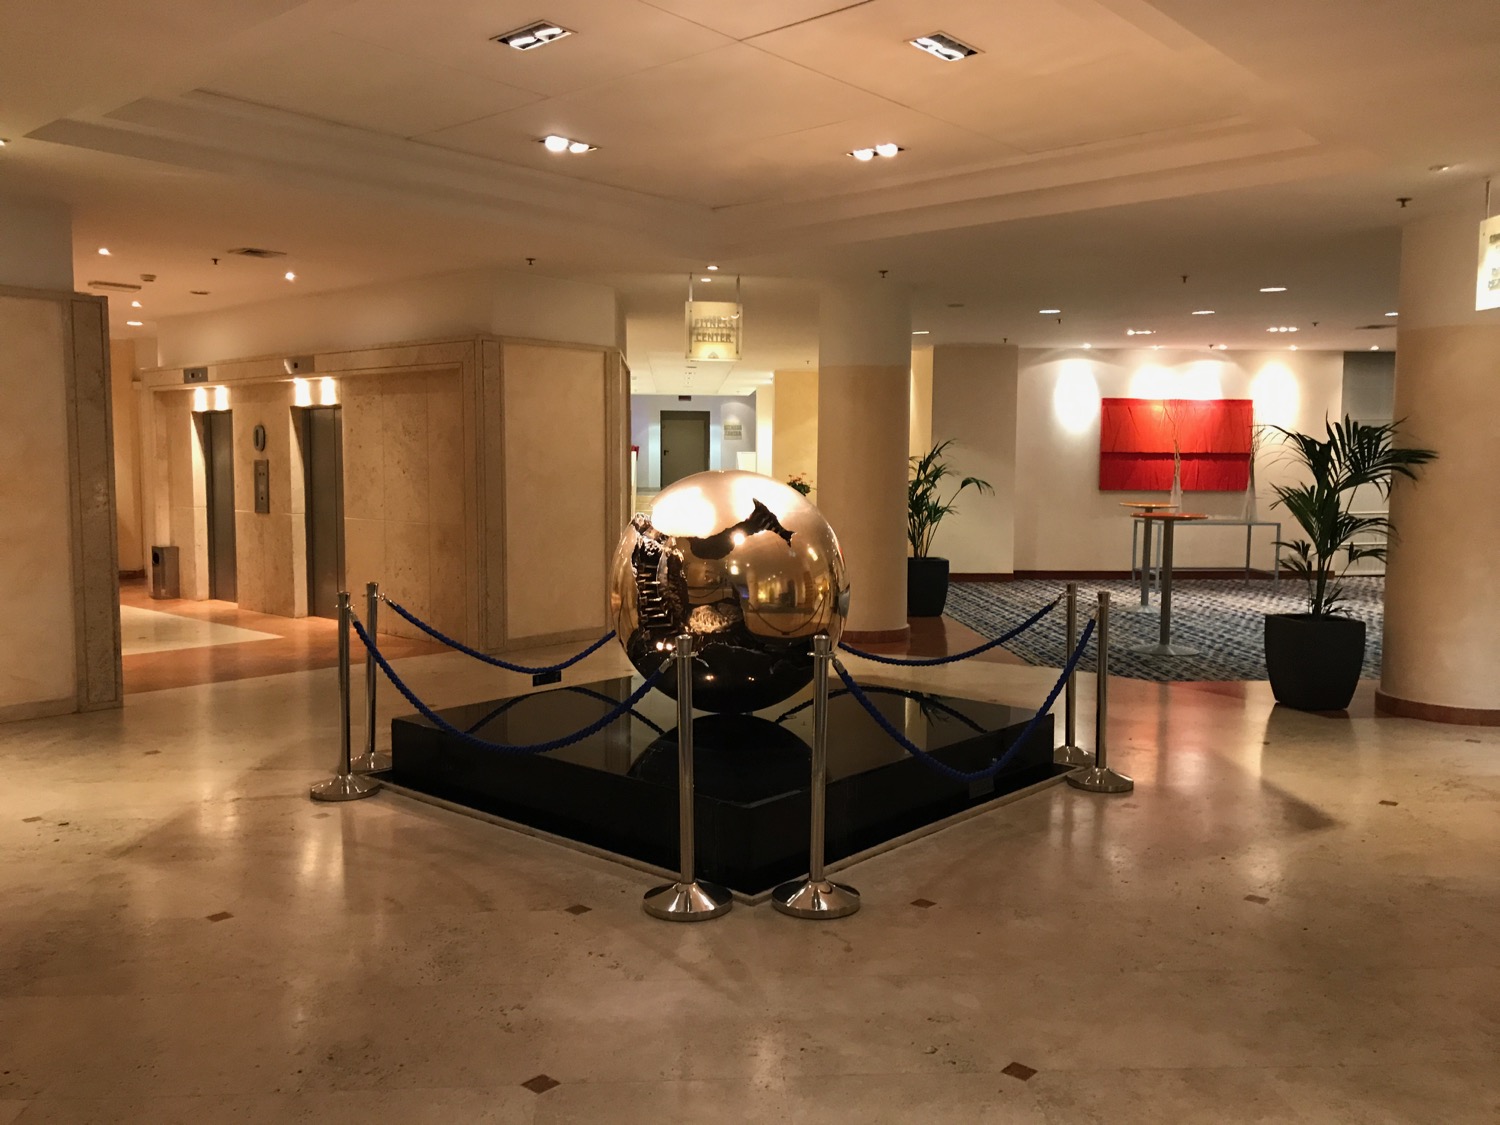 a large round gold object on a black pedestal in a lobby